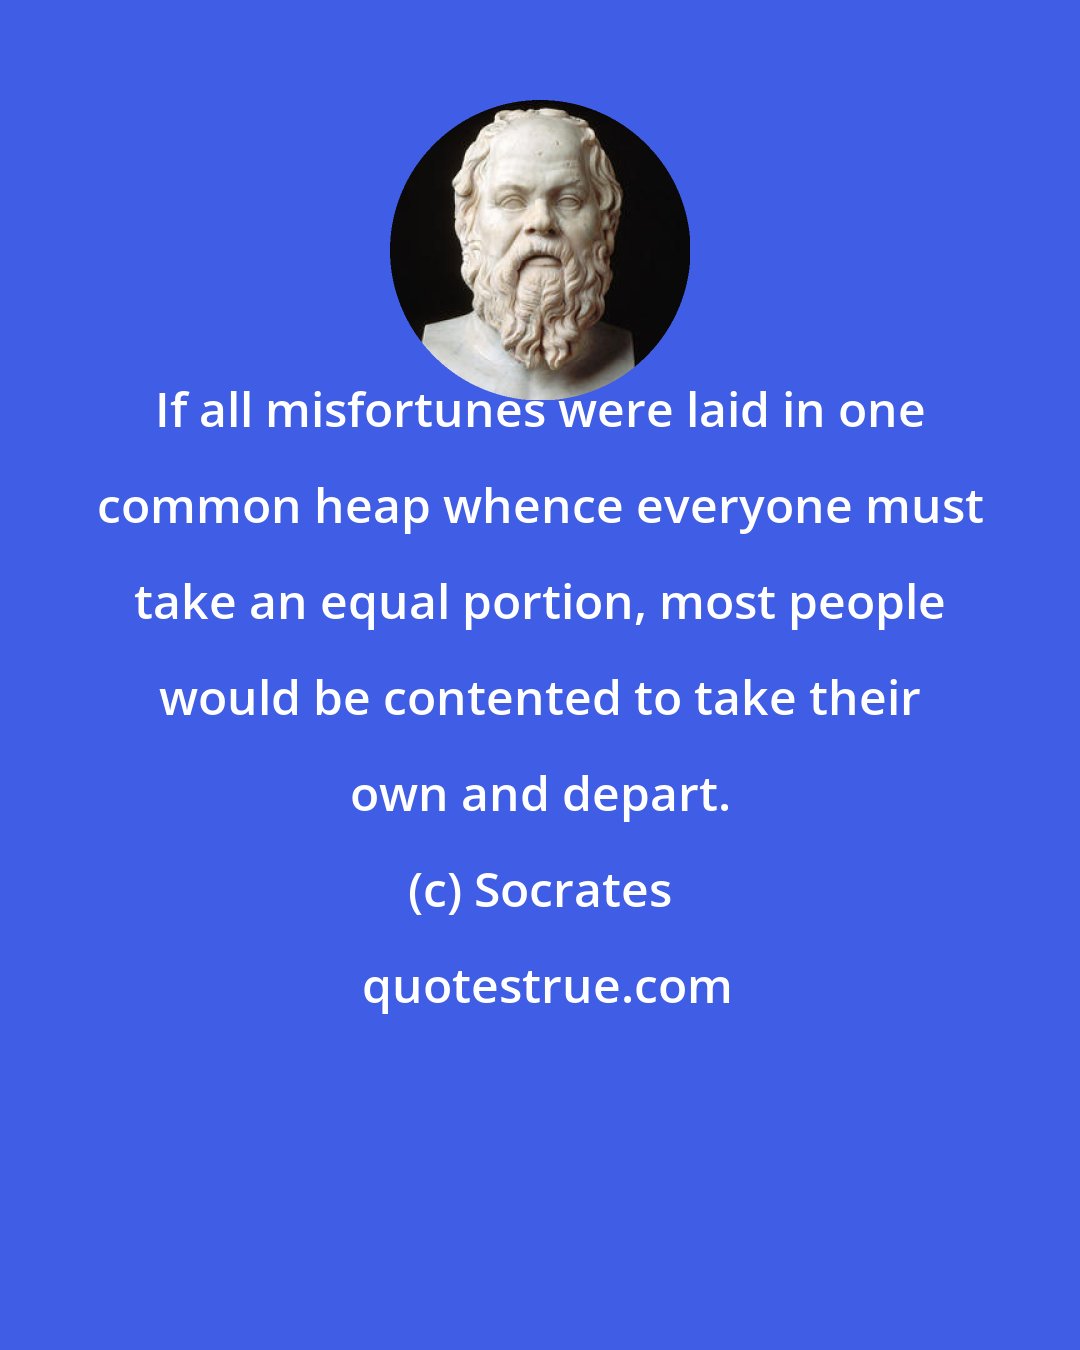 Socrates: If all misfortunes were laid in one common heap whence everyone must take an equal portion, most people would be contented to take their own and depart.